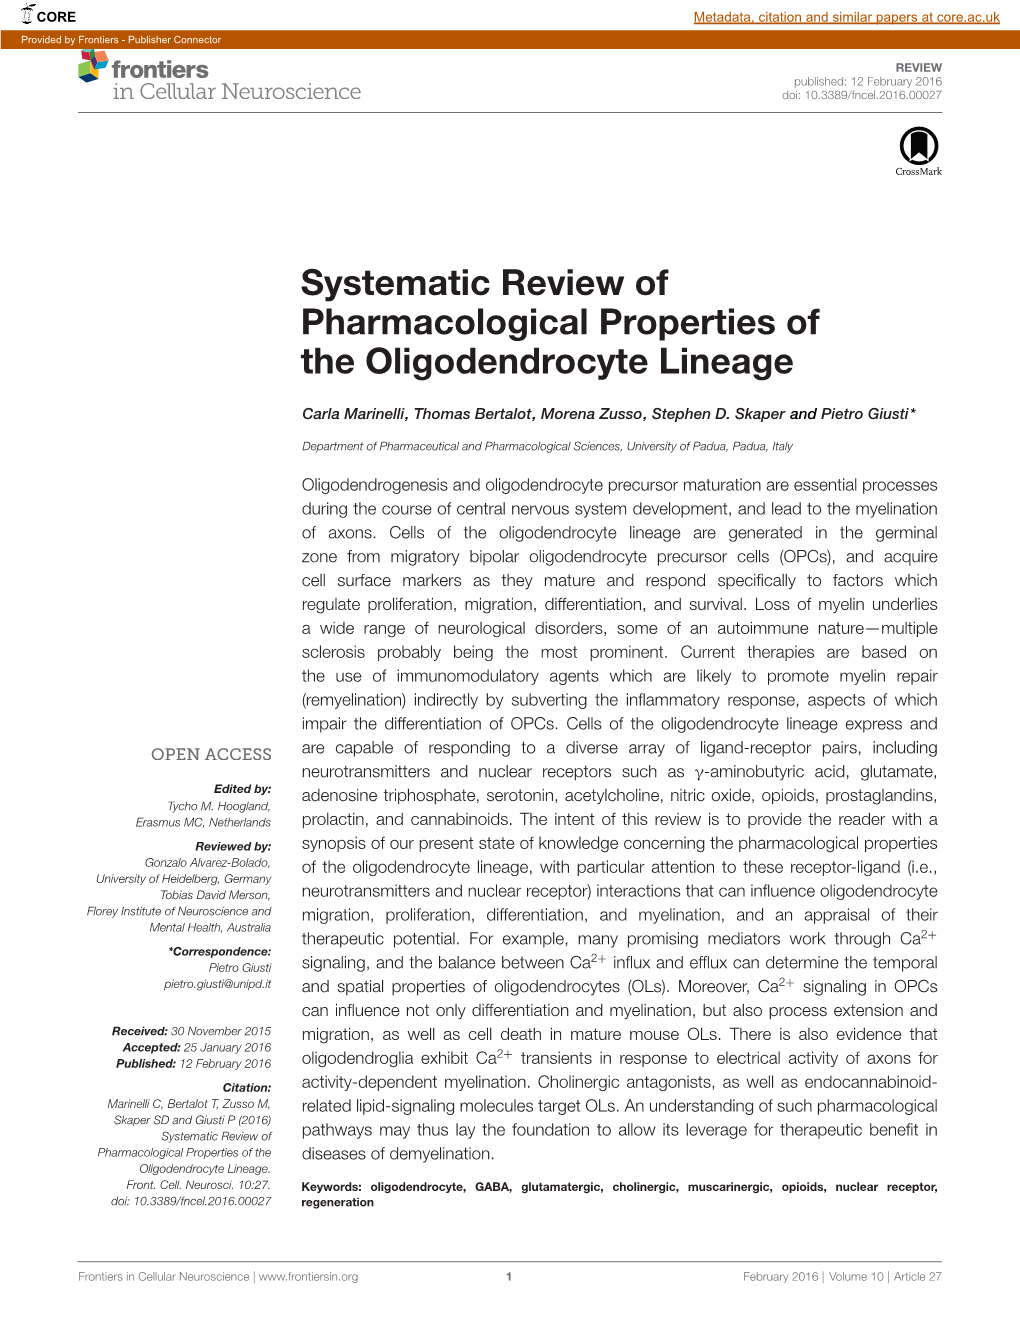 Systematic Review of Pharmacological Properties of the Oligodendrocyte Lineage